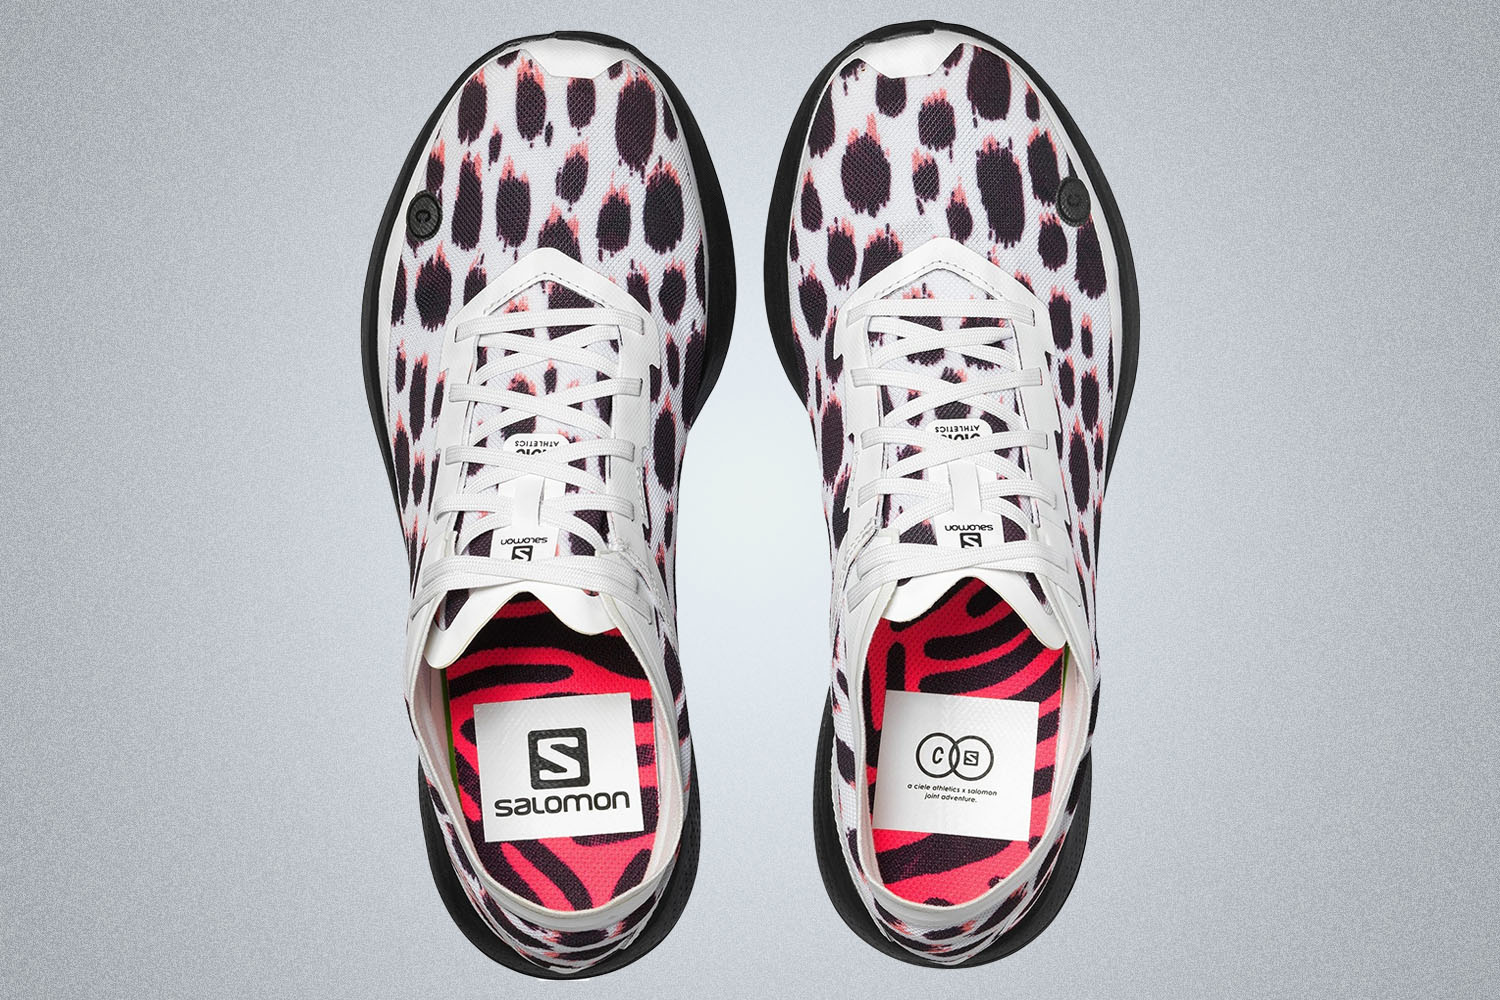 a pair of colorful white and red spotted runners from Salomon on a grey background